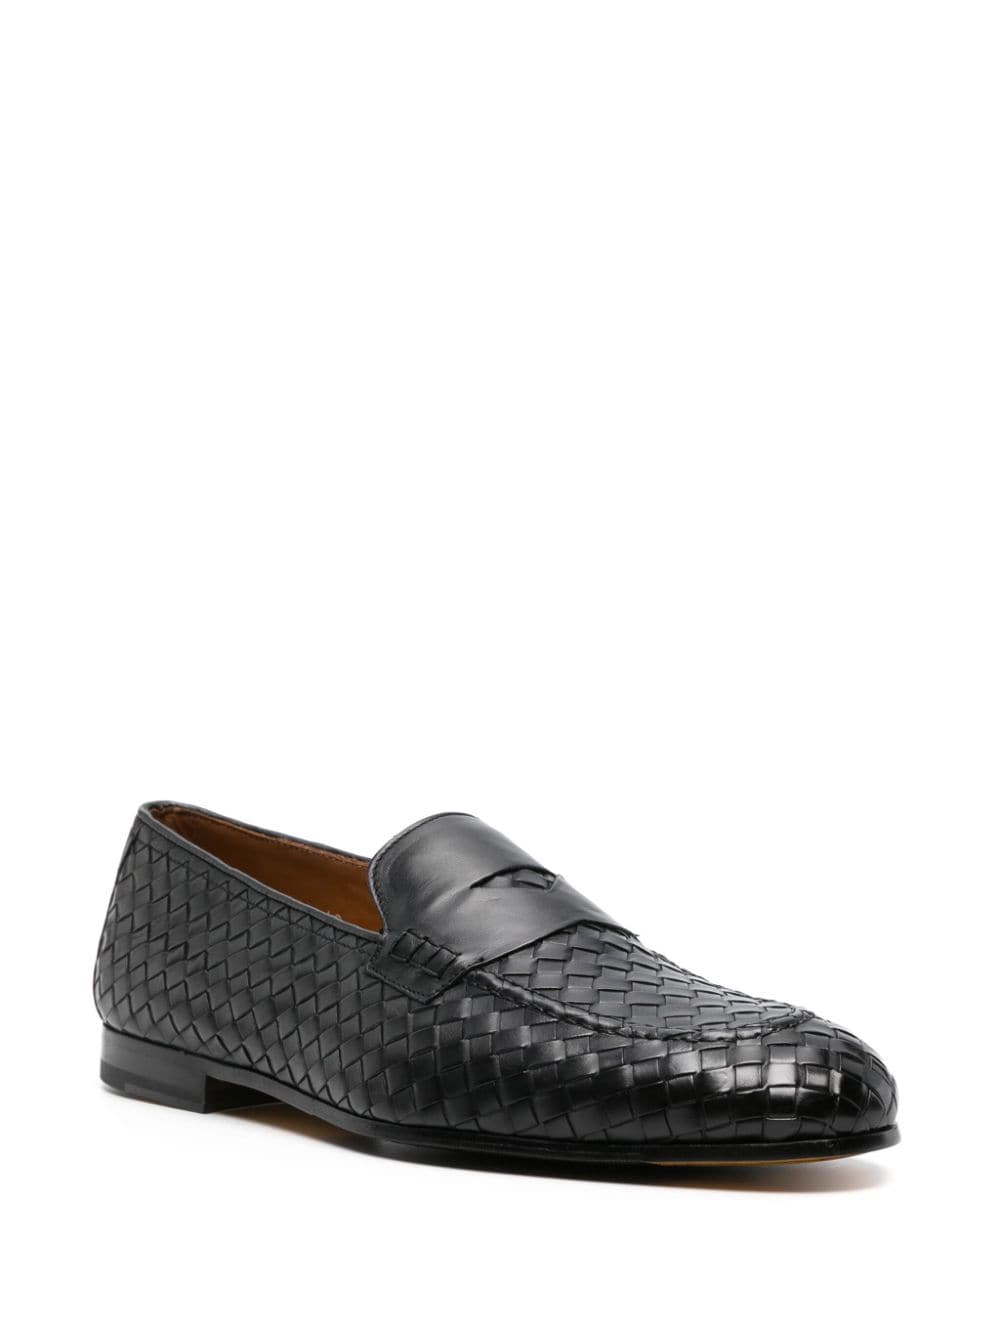 Image 2 of Doucal's interwoven-design leather loafers